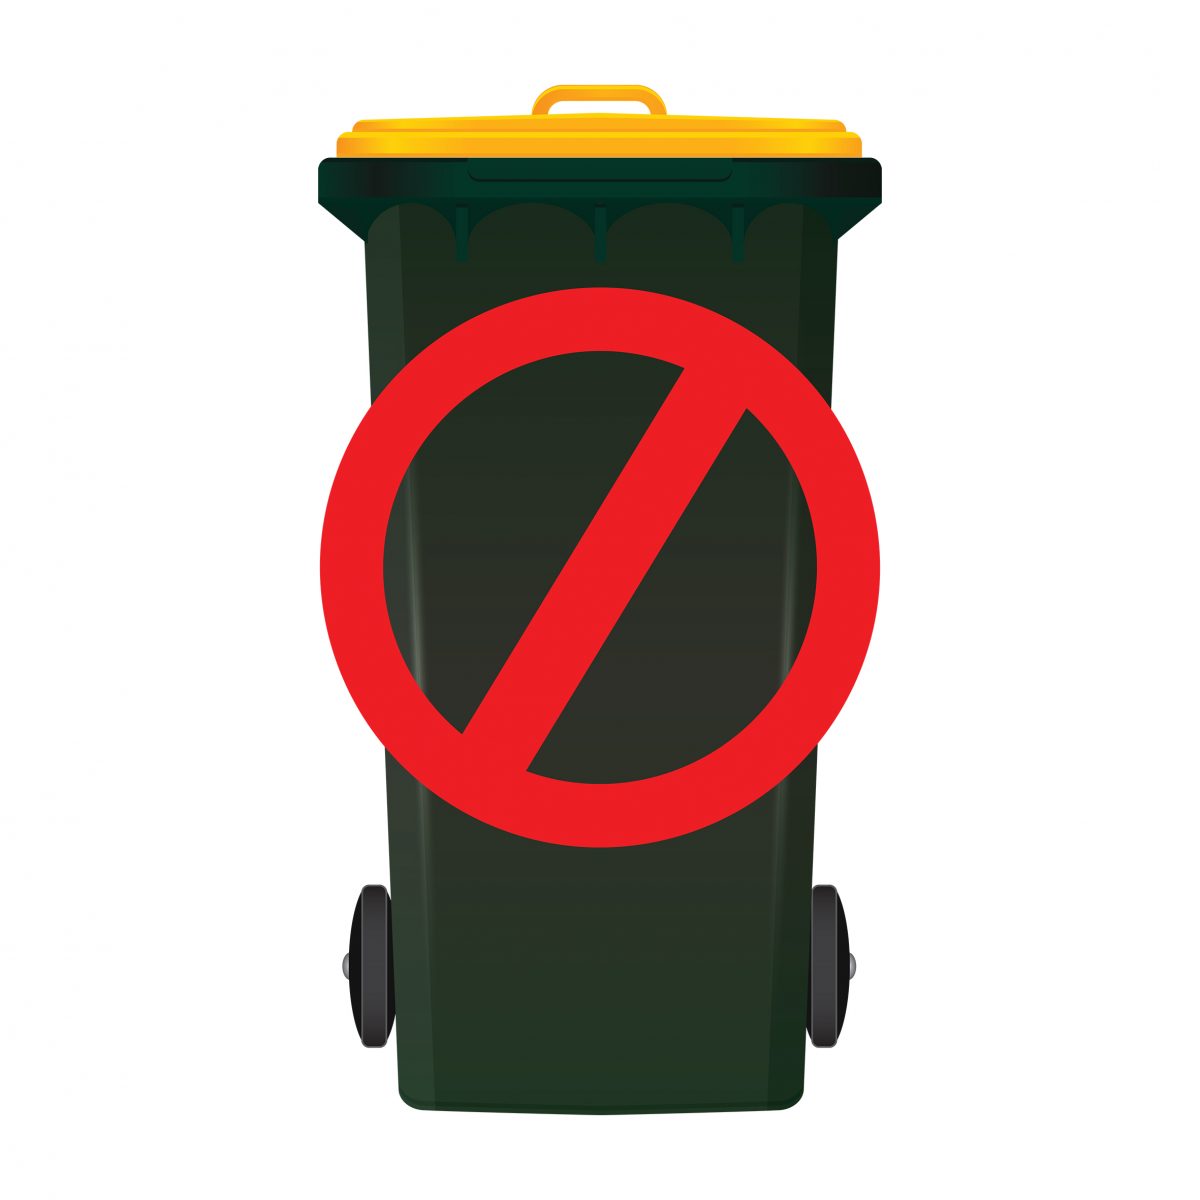 Don't let contamination make your recyclables go to waste!